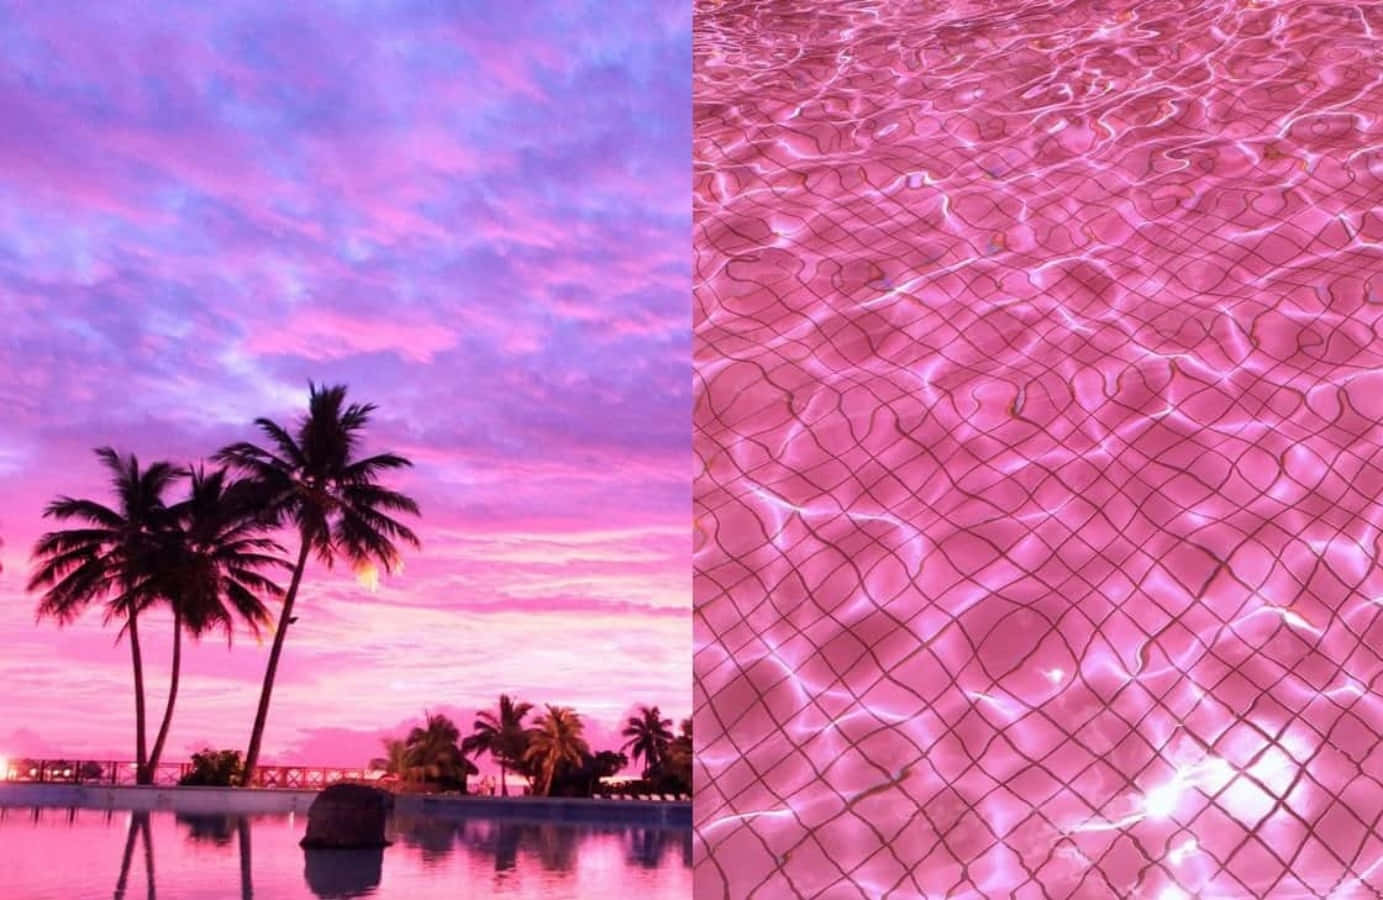 Aesthetic Pink Collage Sunset Sky And Pool Water Wallpaper